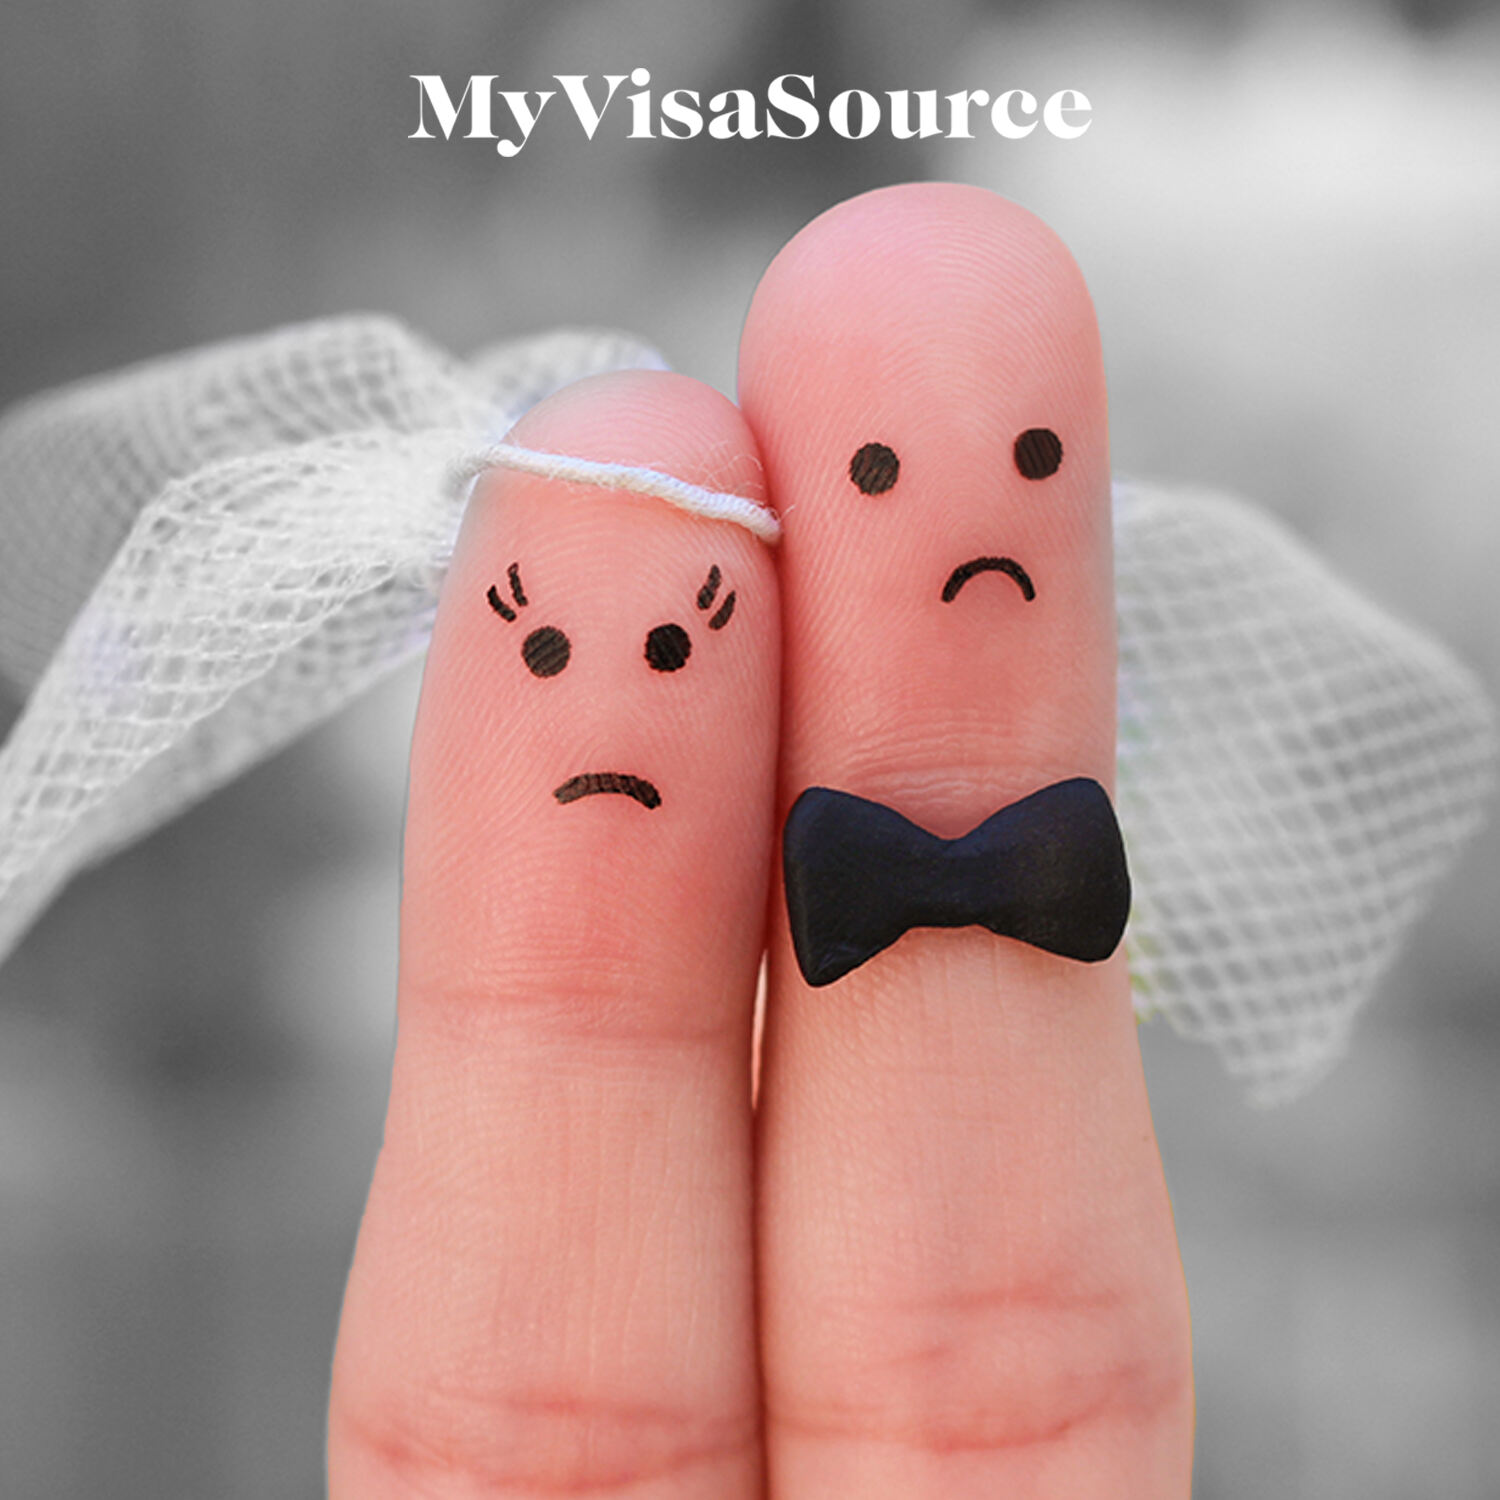 2 fingers dressed as married couple with unhappy faces drawn on my visa source